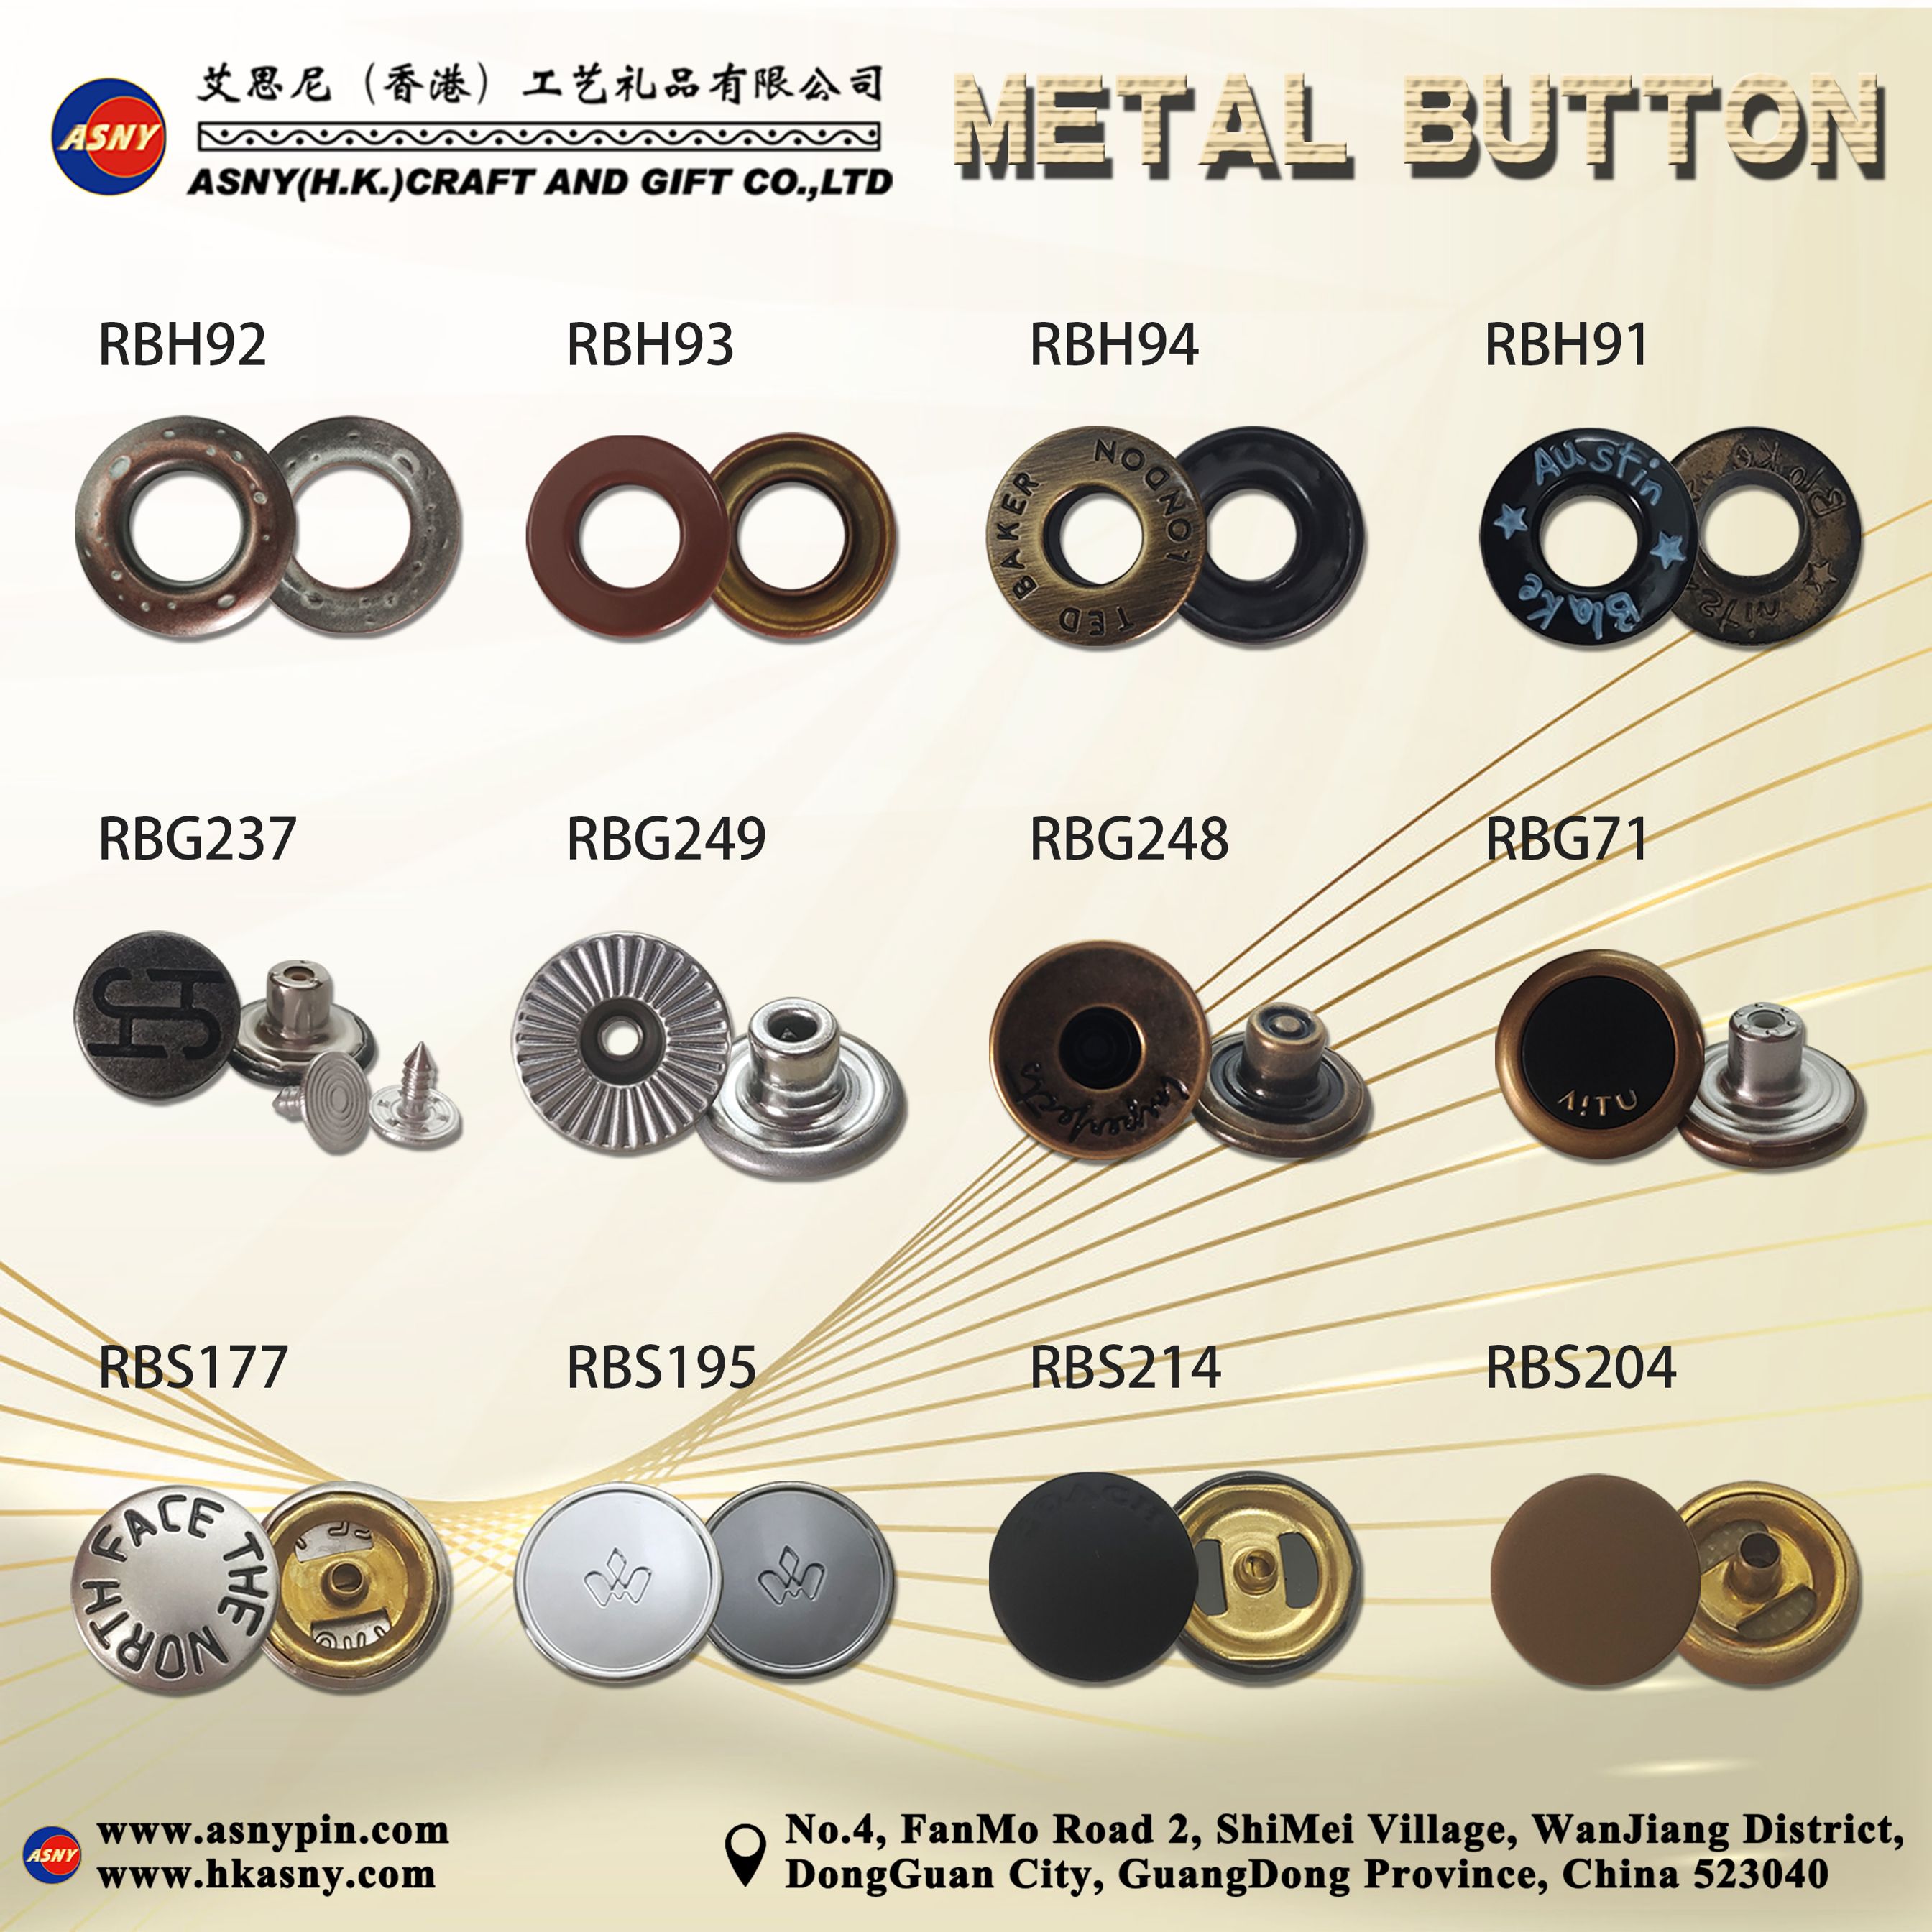 Catalog  - Accessory - Clothes/Shoes Metal Button Design/Production/Make/Supply/Factory (2)